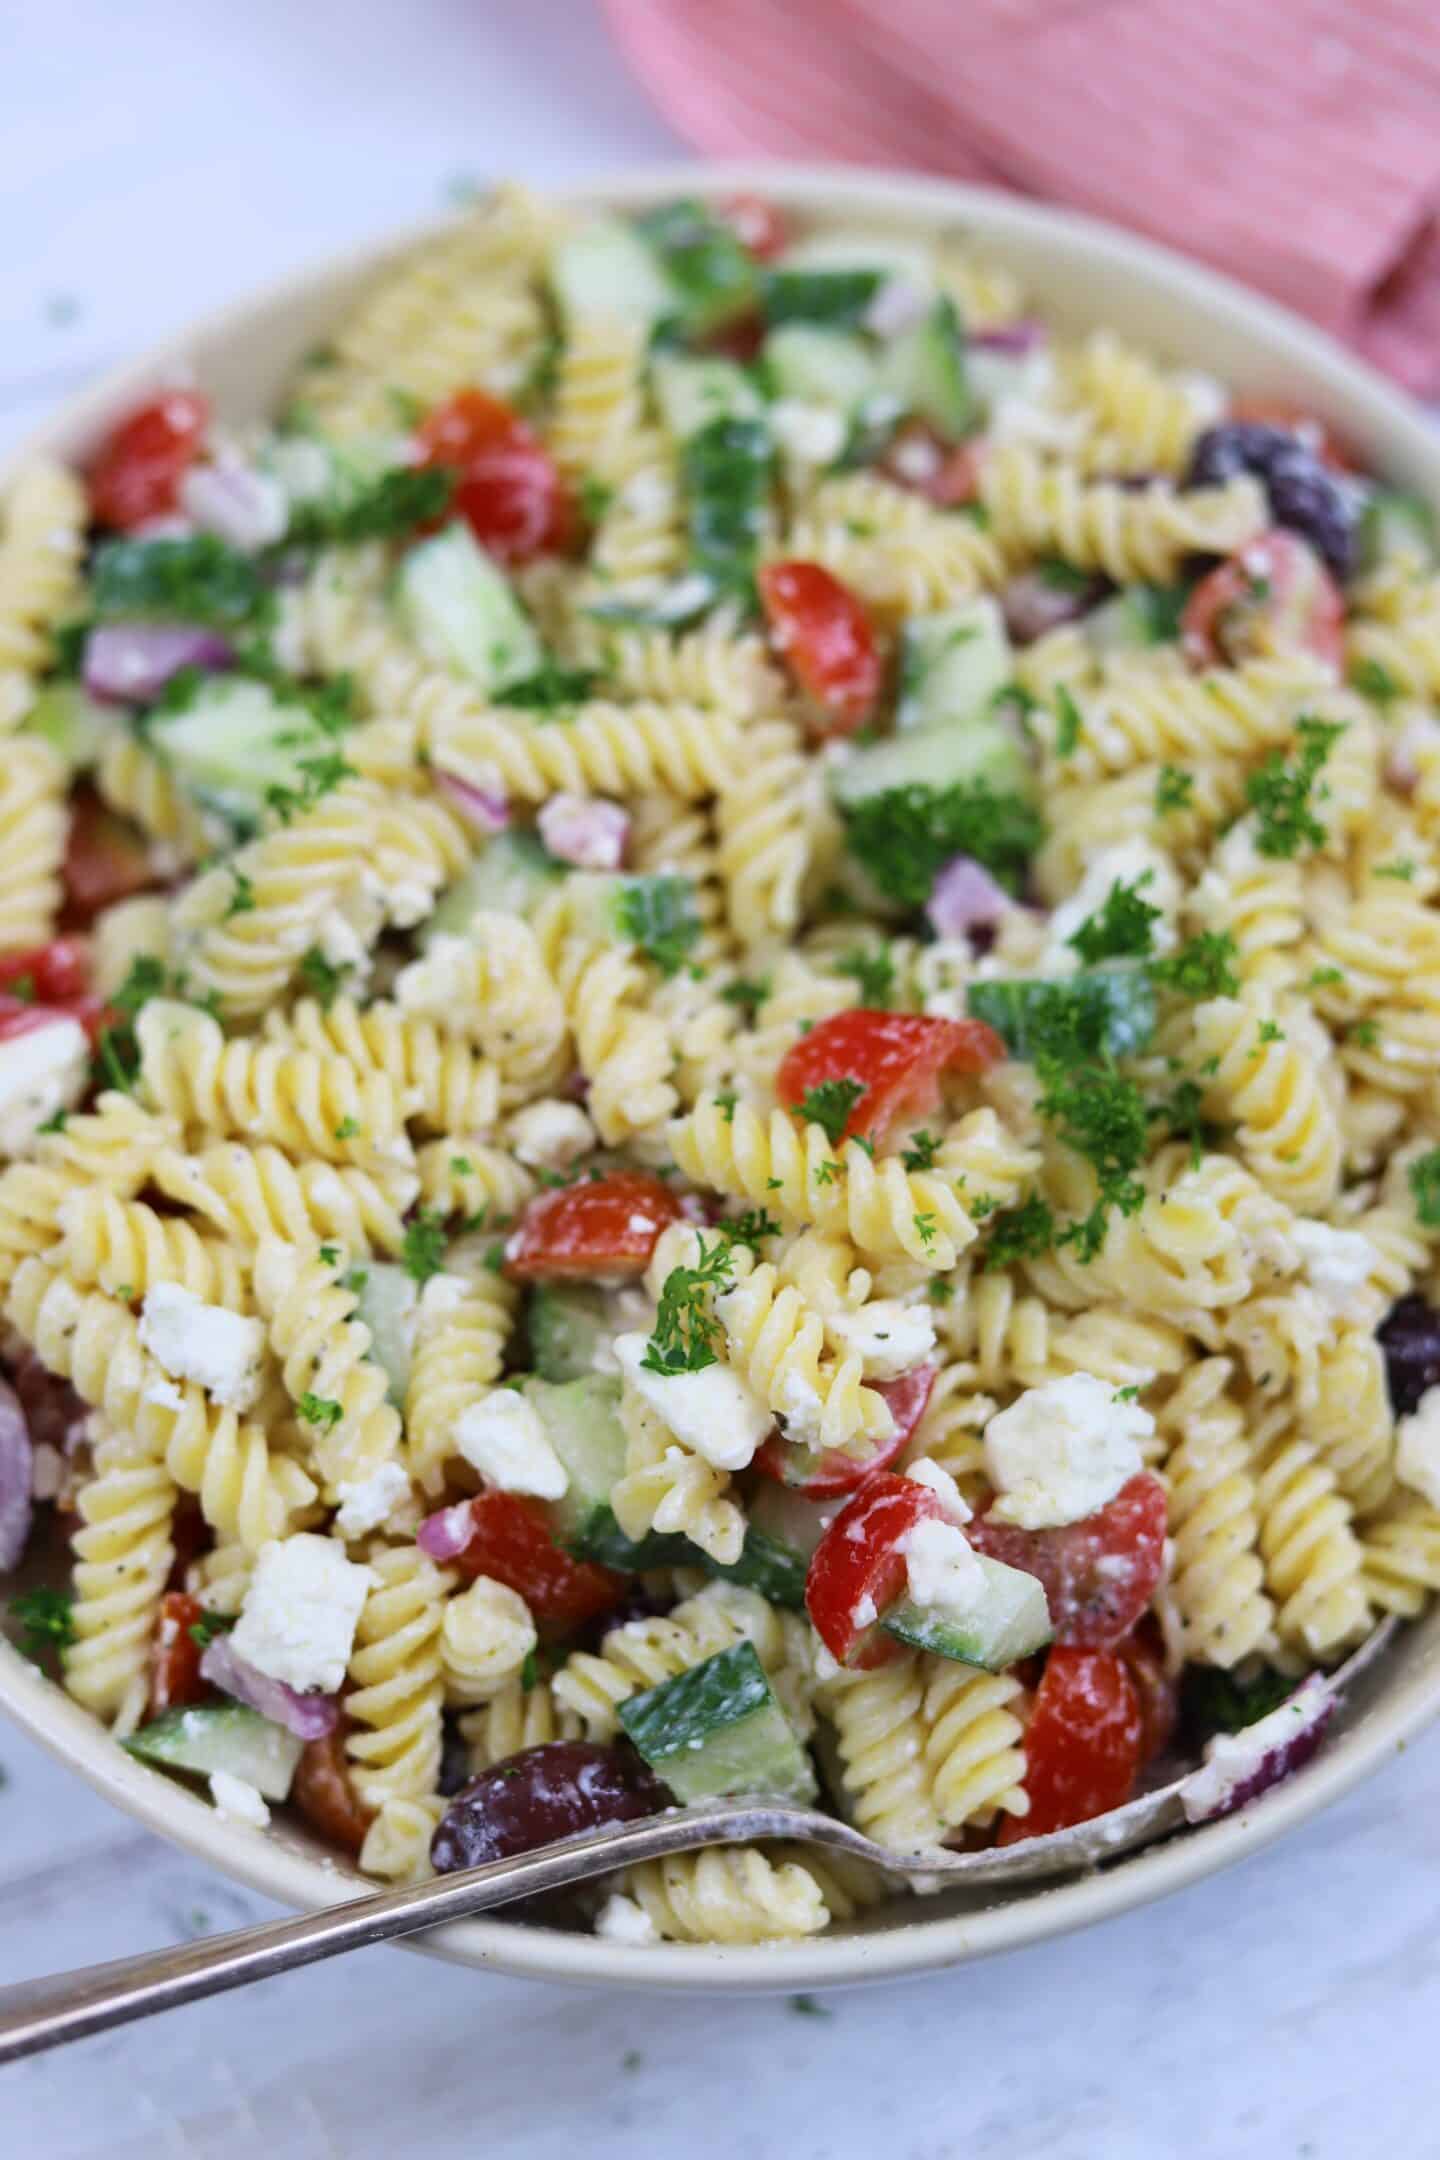 A close up of pasta salad with a Greek style dressing.